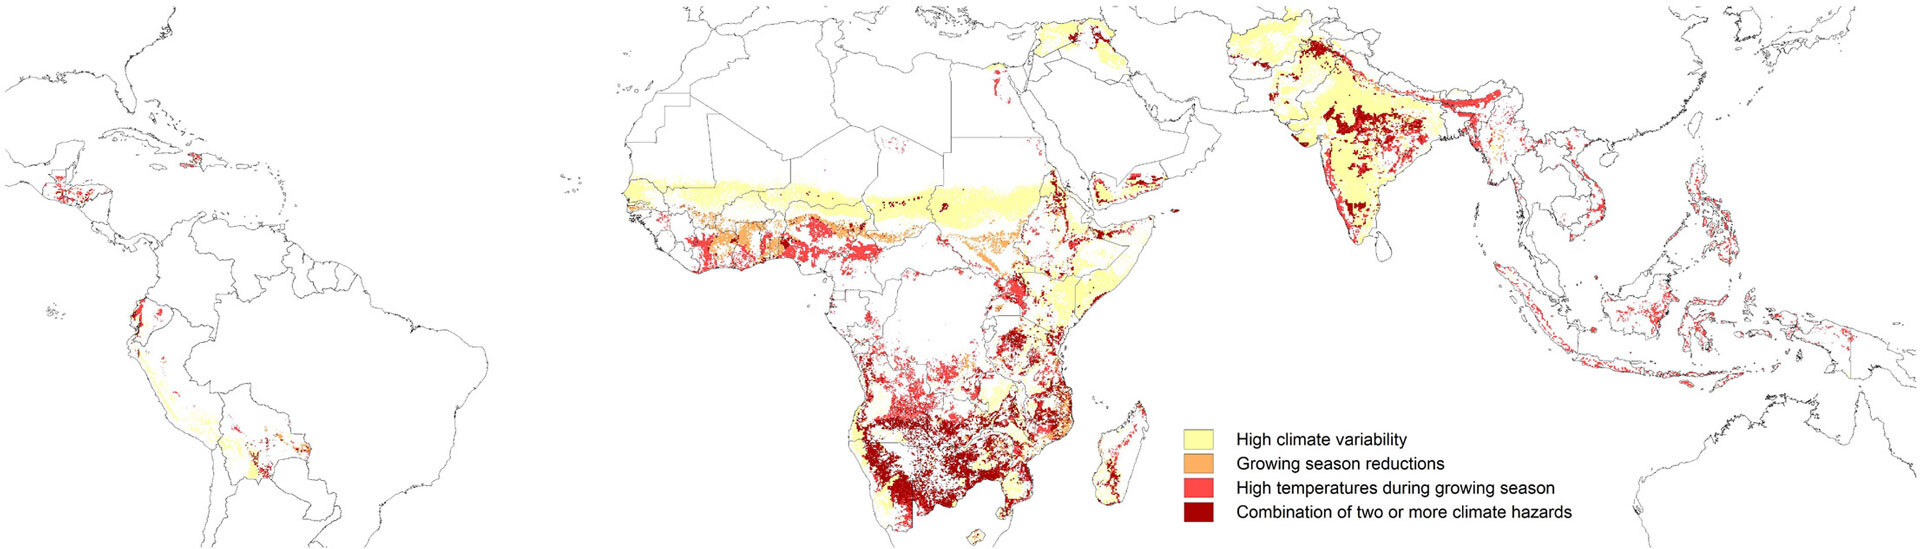 Areas of High Agricultural Risk for Different Climate Hazards in Vulnerable Areas.